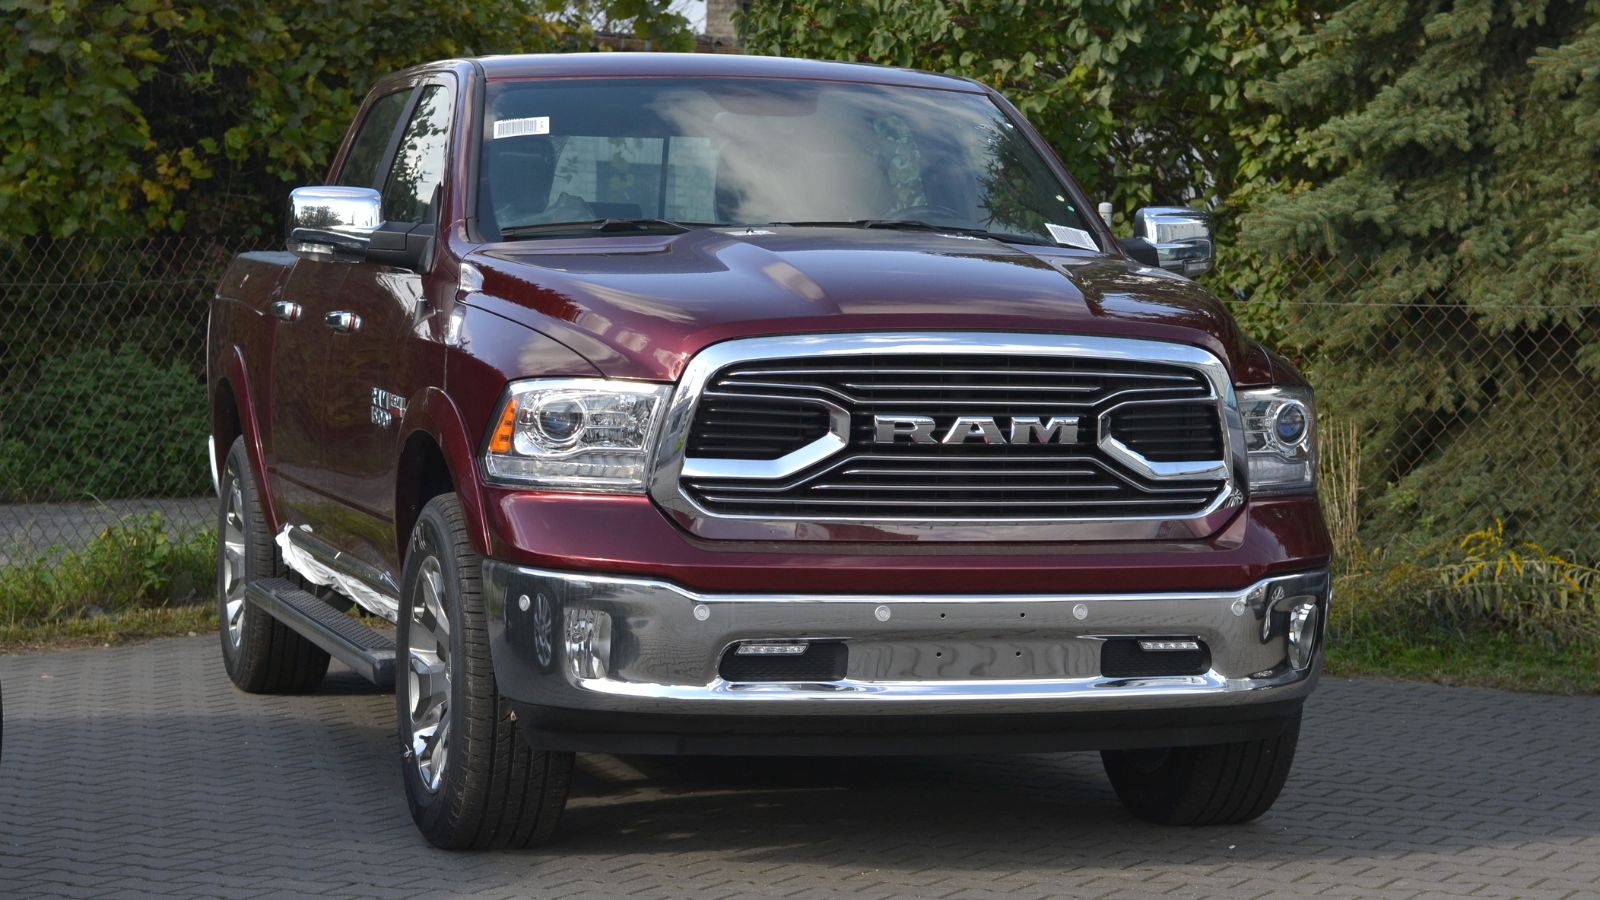 <p>Ram pick-up trucks, famous for their power and durability, might seem like a great used car option. However, earlier examples of the Ram 1500 were subject to multiple recalls for problems with their brakes, suspension, and electrical systems. Some faulty vehicles slipped through the cracks, though, so make sure you don’t accidentally purchase one of those!</p>